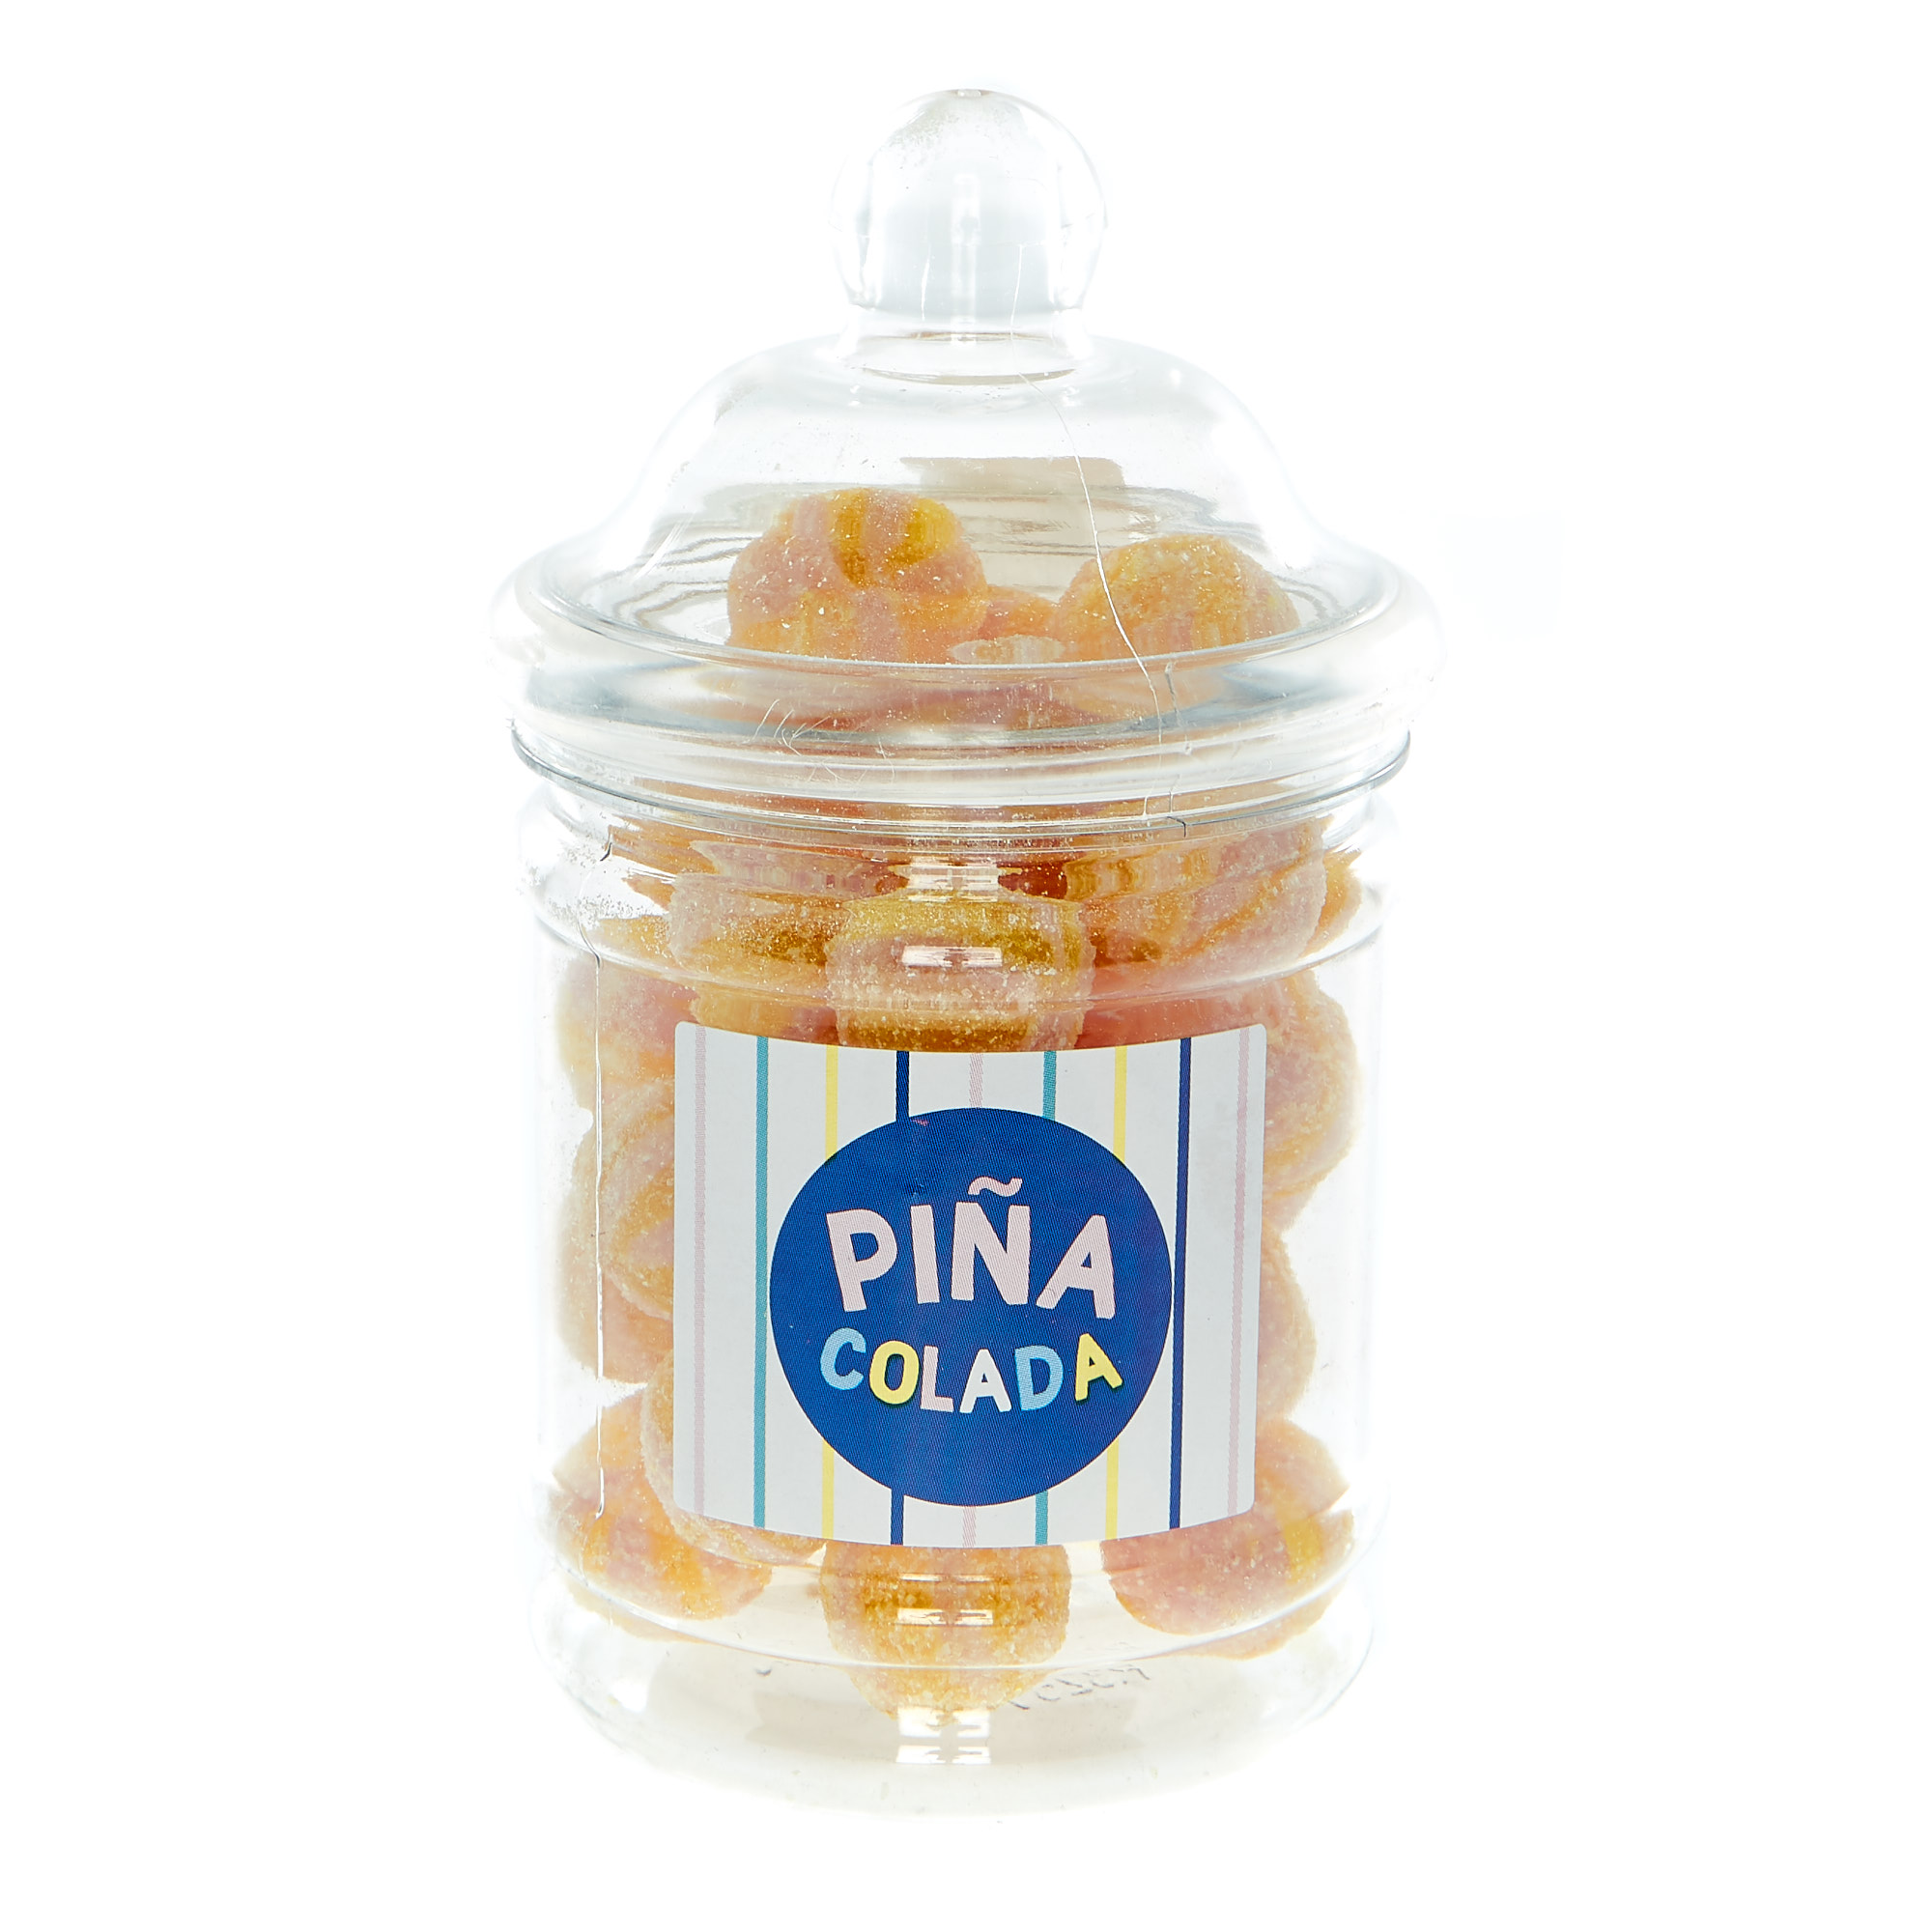 Pina Colada Boiled Sweets In A Jar